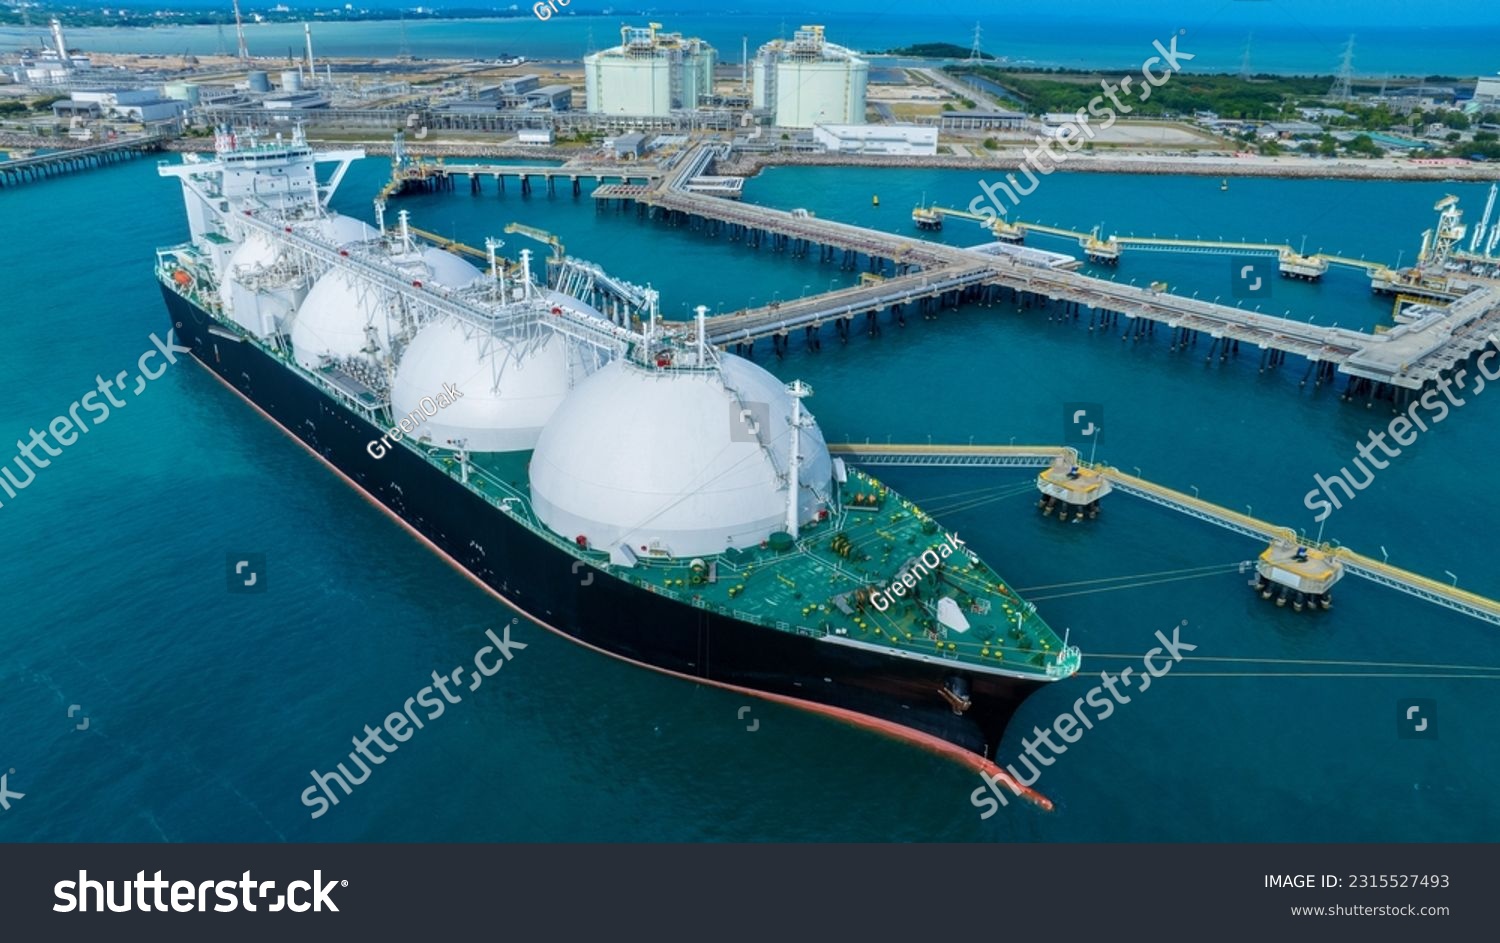 LNG (Liquified Natural Gas) tanker anchored in Gas terminal gas tanks for storage. Oil Crude Gas Tanker Ship. LPG at Tanker Bay Petroleum Chemical or Methane freighter export import transportation  #2315527493